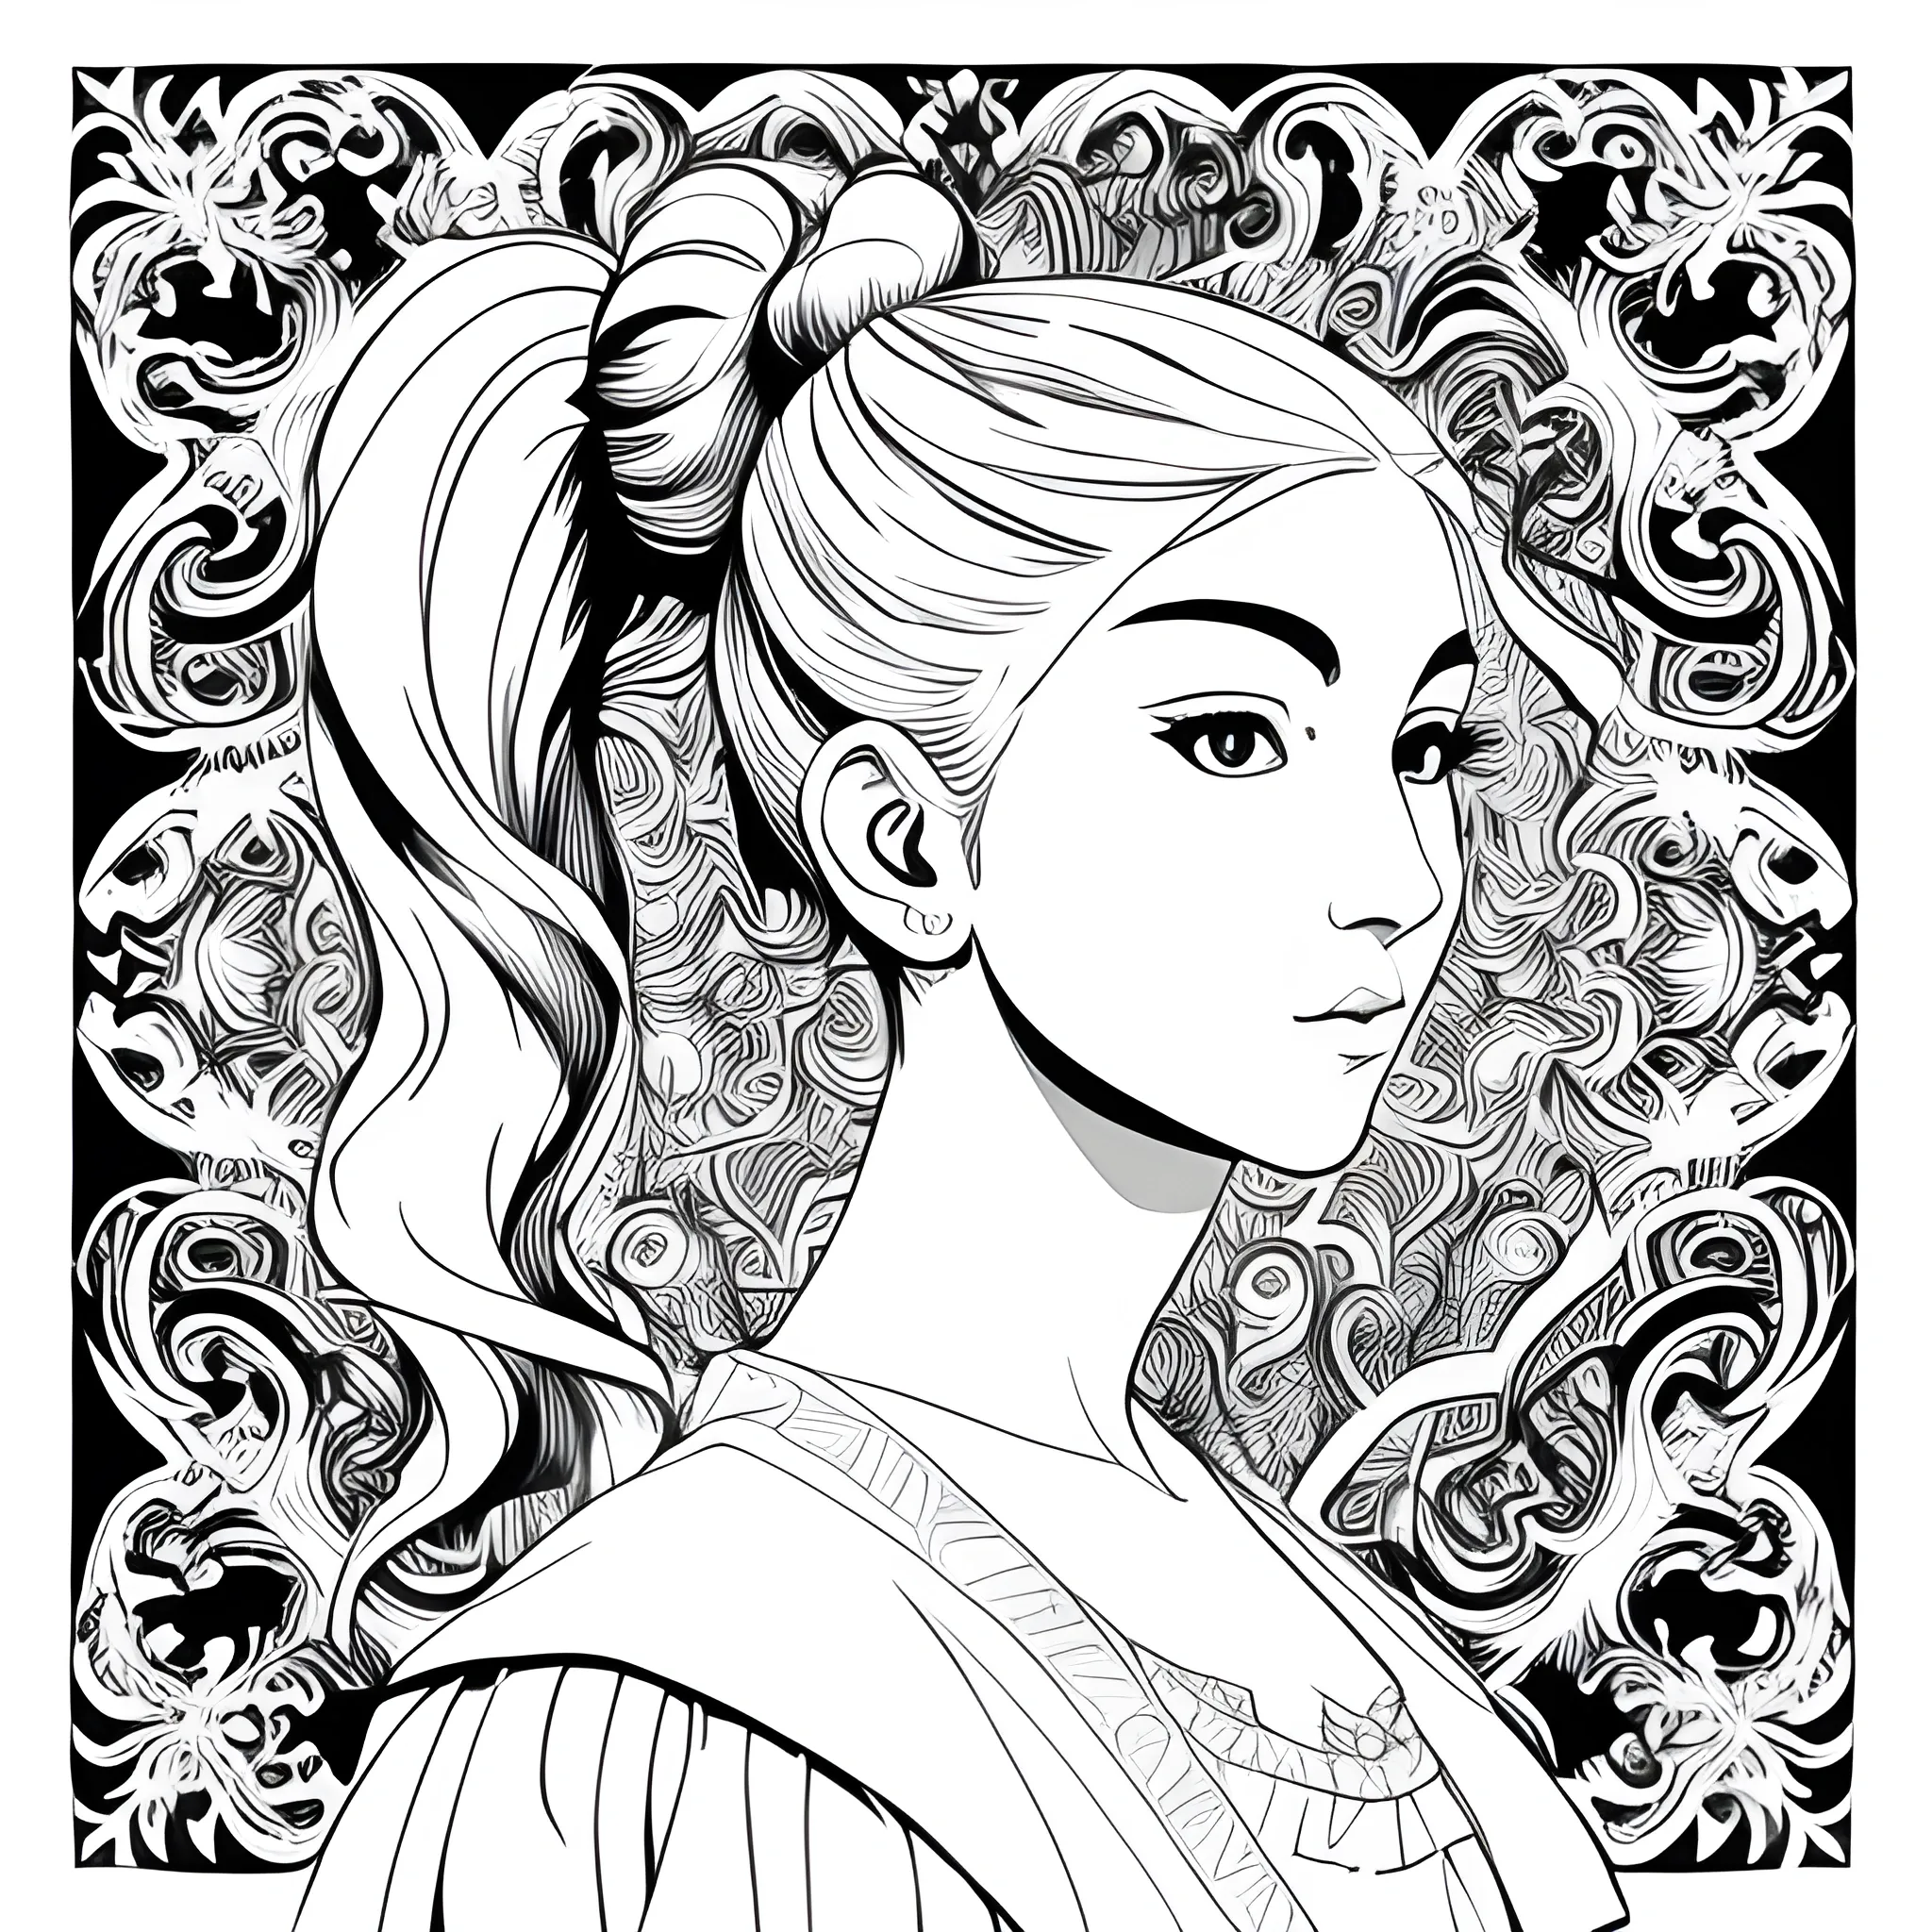 masterpiece, line art of a female character with ponytail, baroque patterns, style by double exposure, no shading, for coloring page, white space, no shadowing